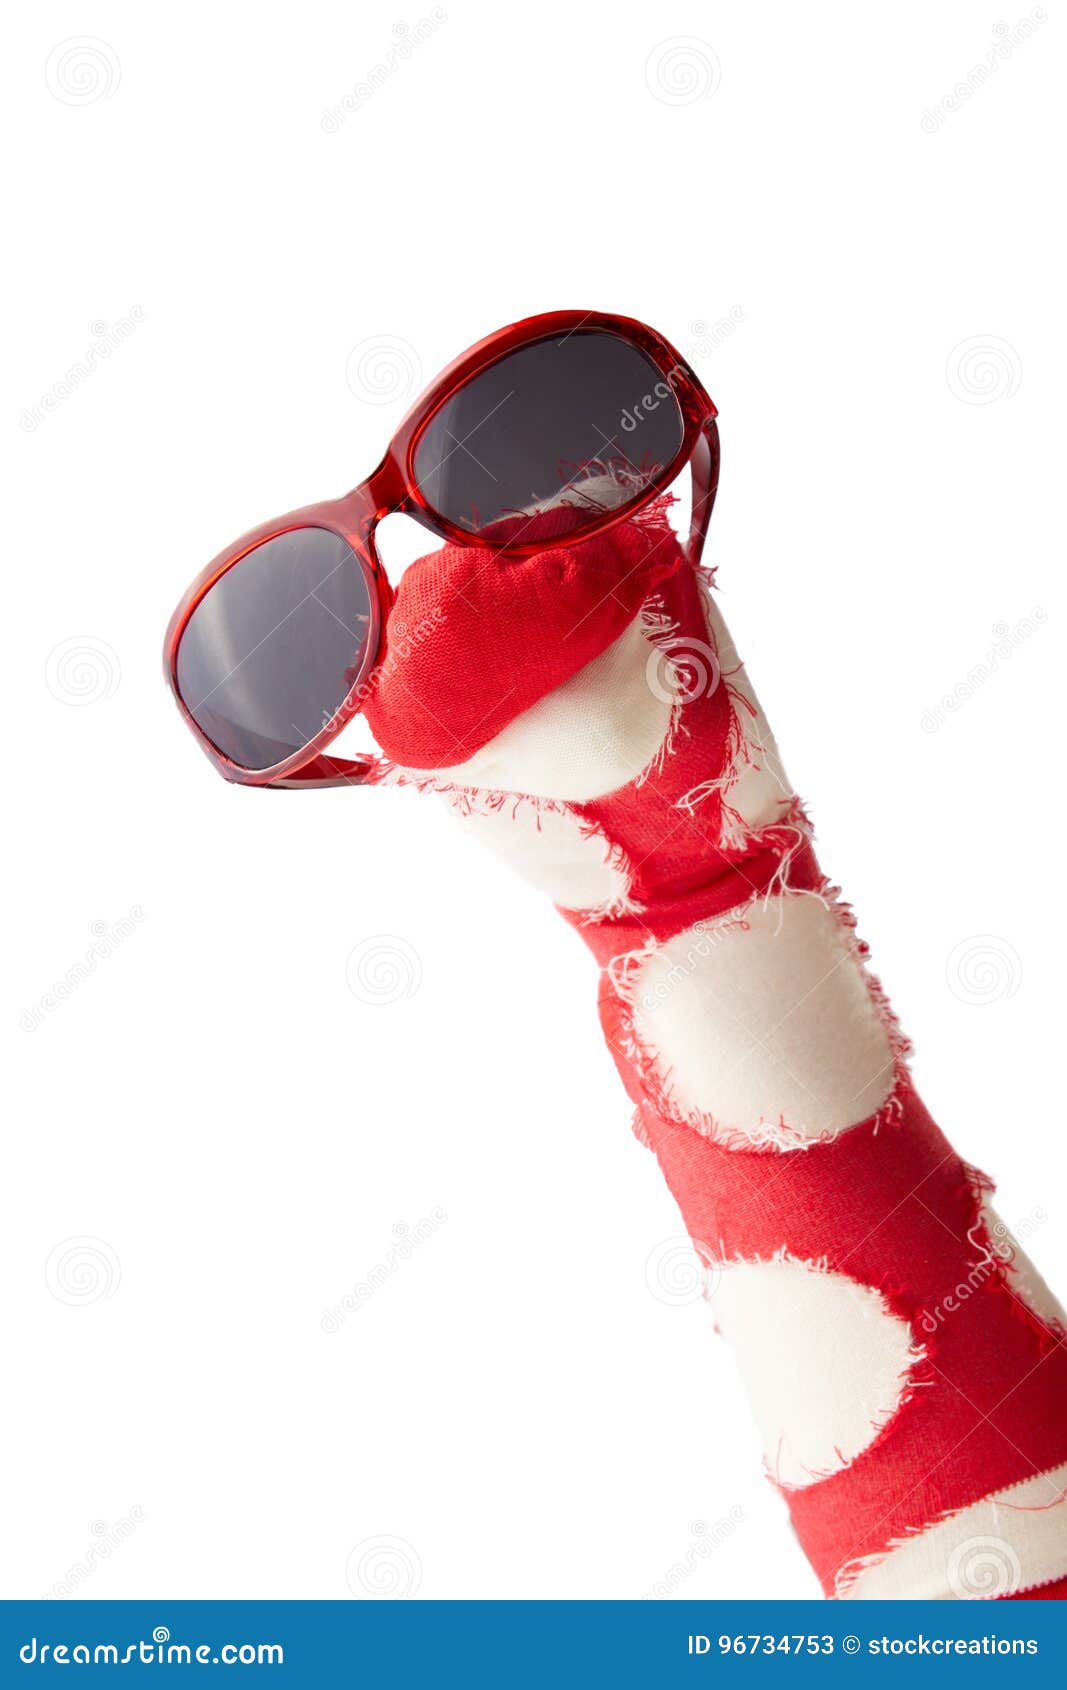 fun colorful red sock puppet in sunglasses